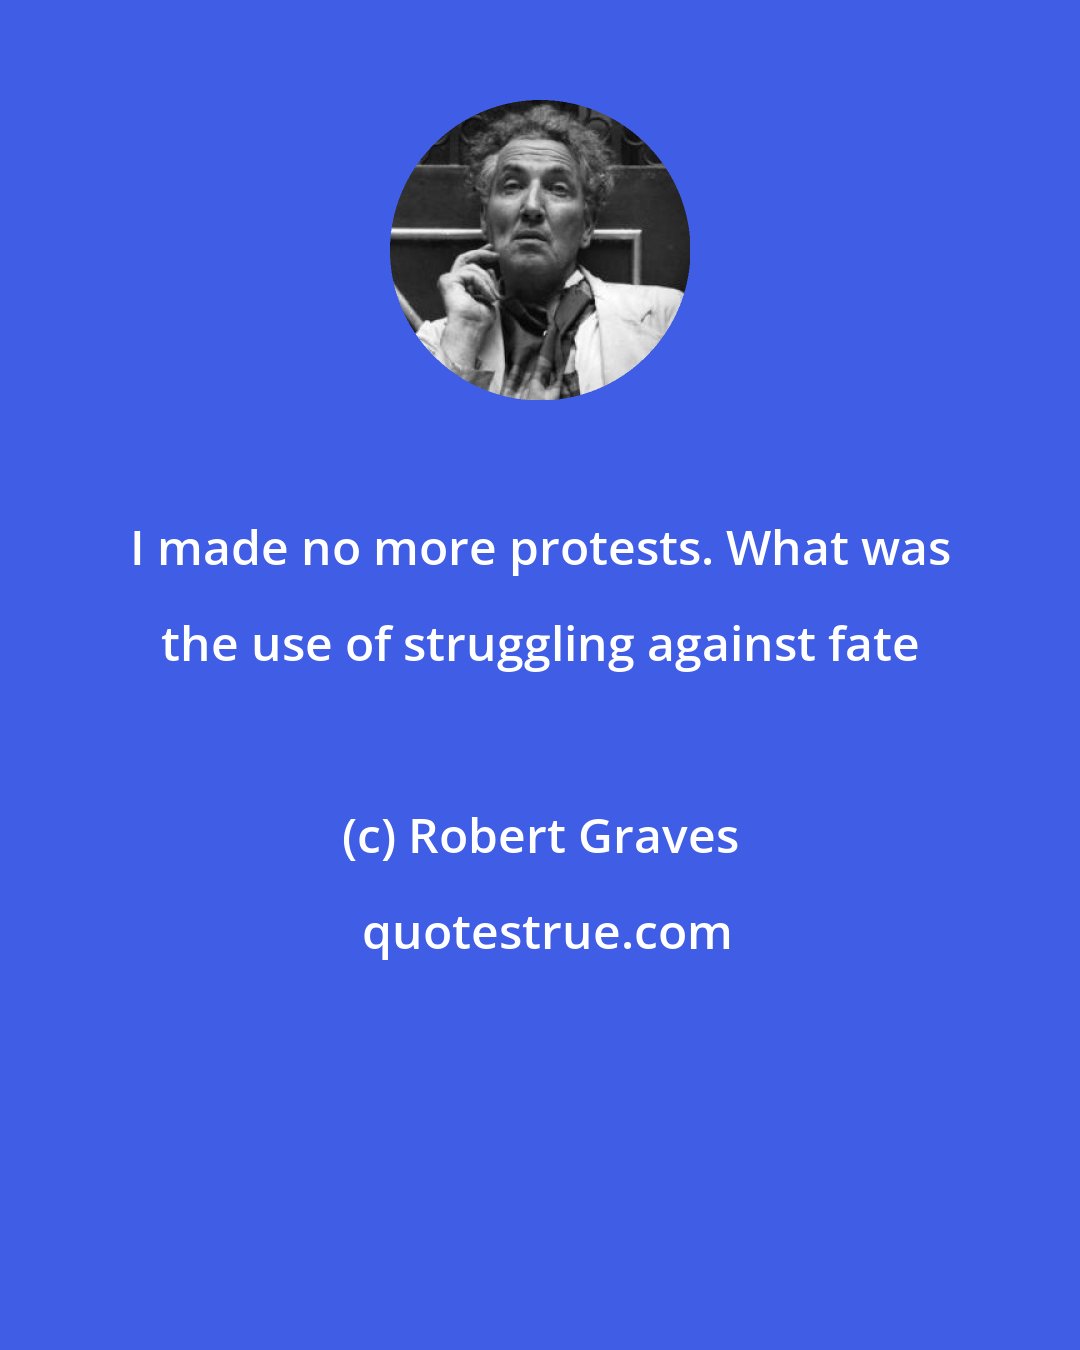 Robert Graves: I made no more protests. What was the use of struggling against fate